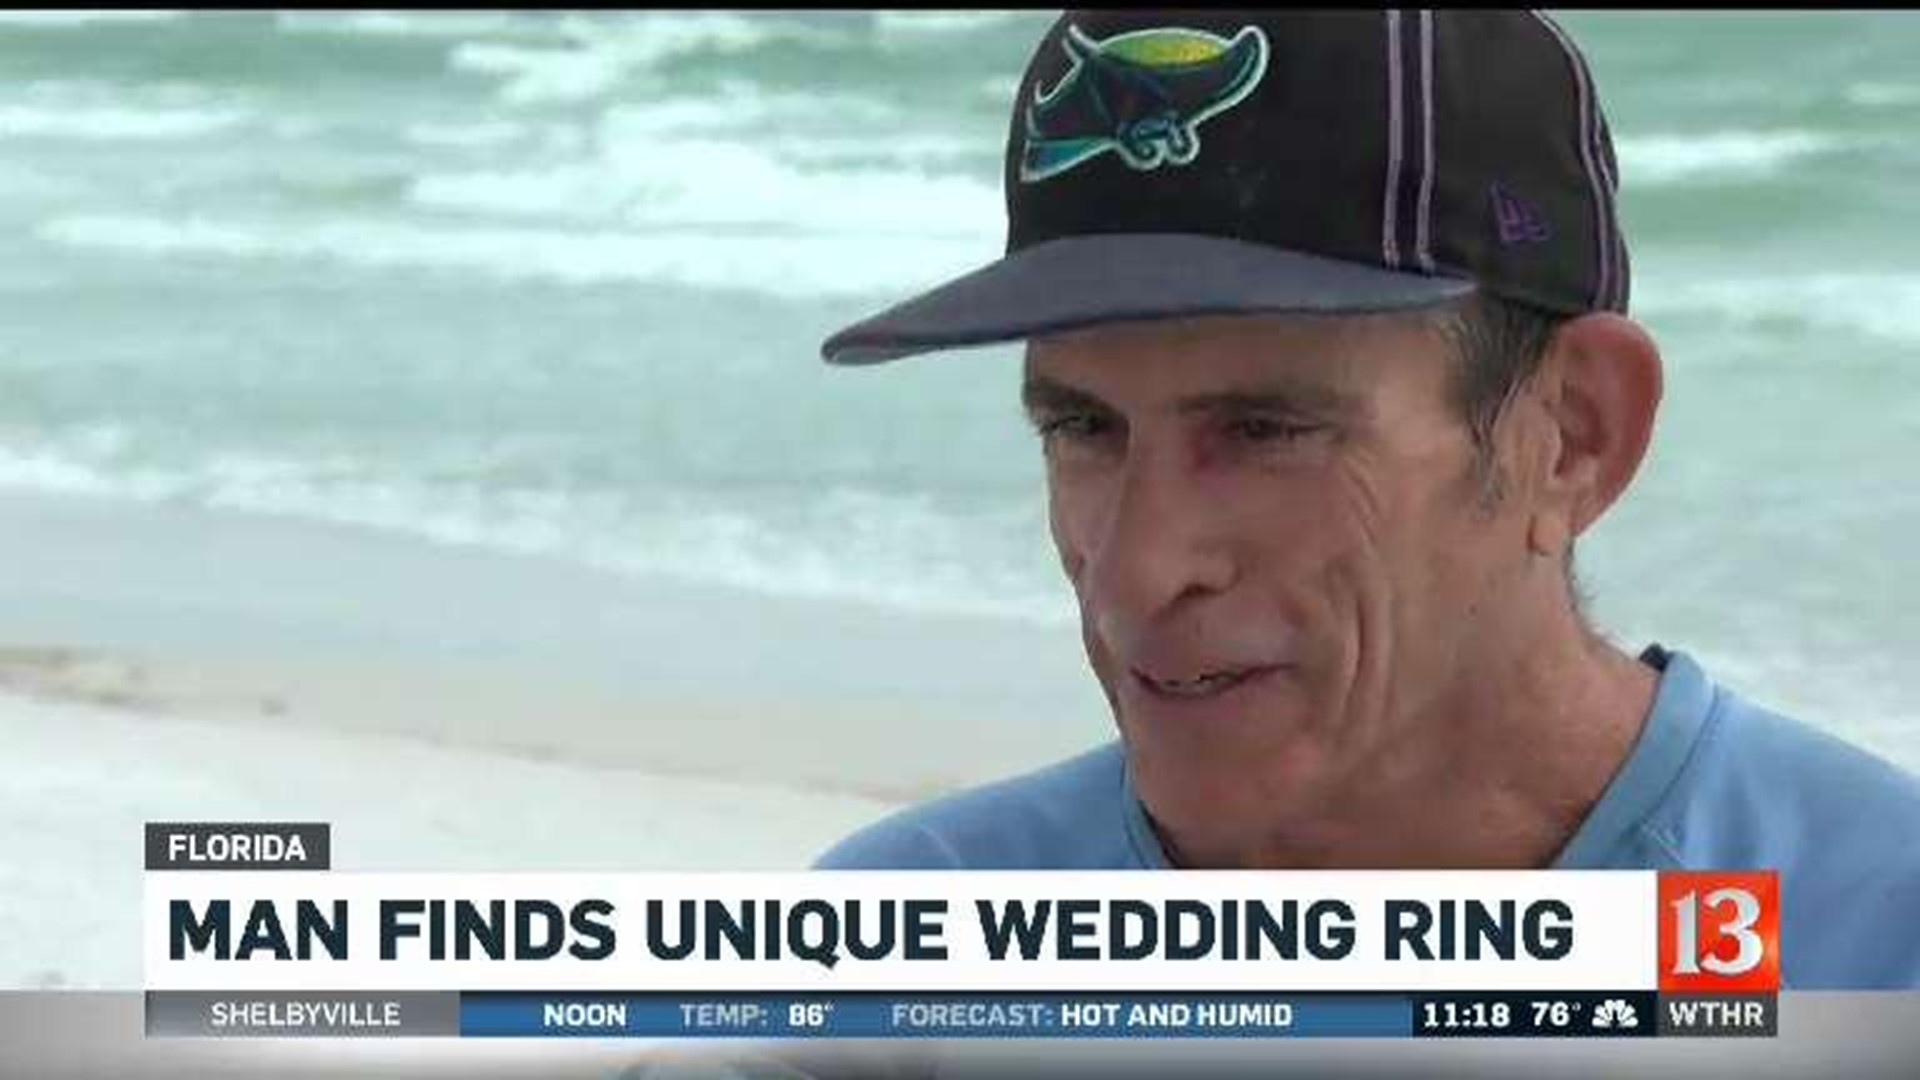 Man Finds Unique Wedding Ring on Florida Beach